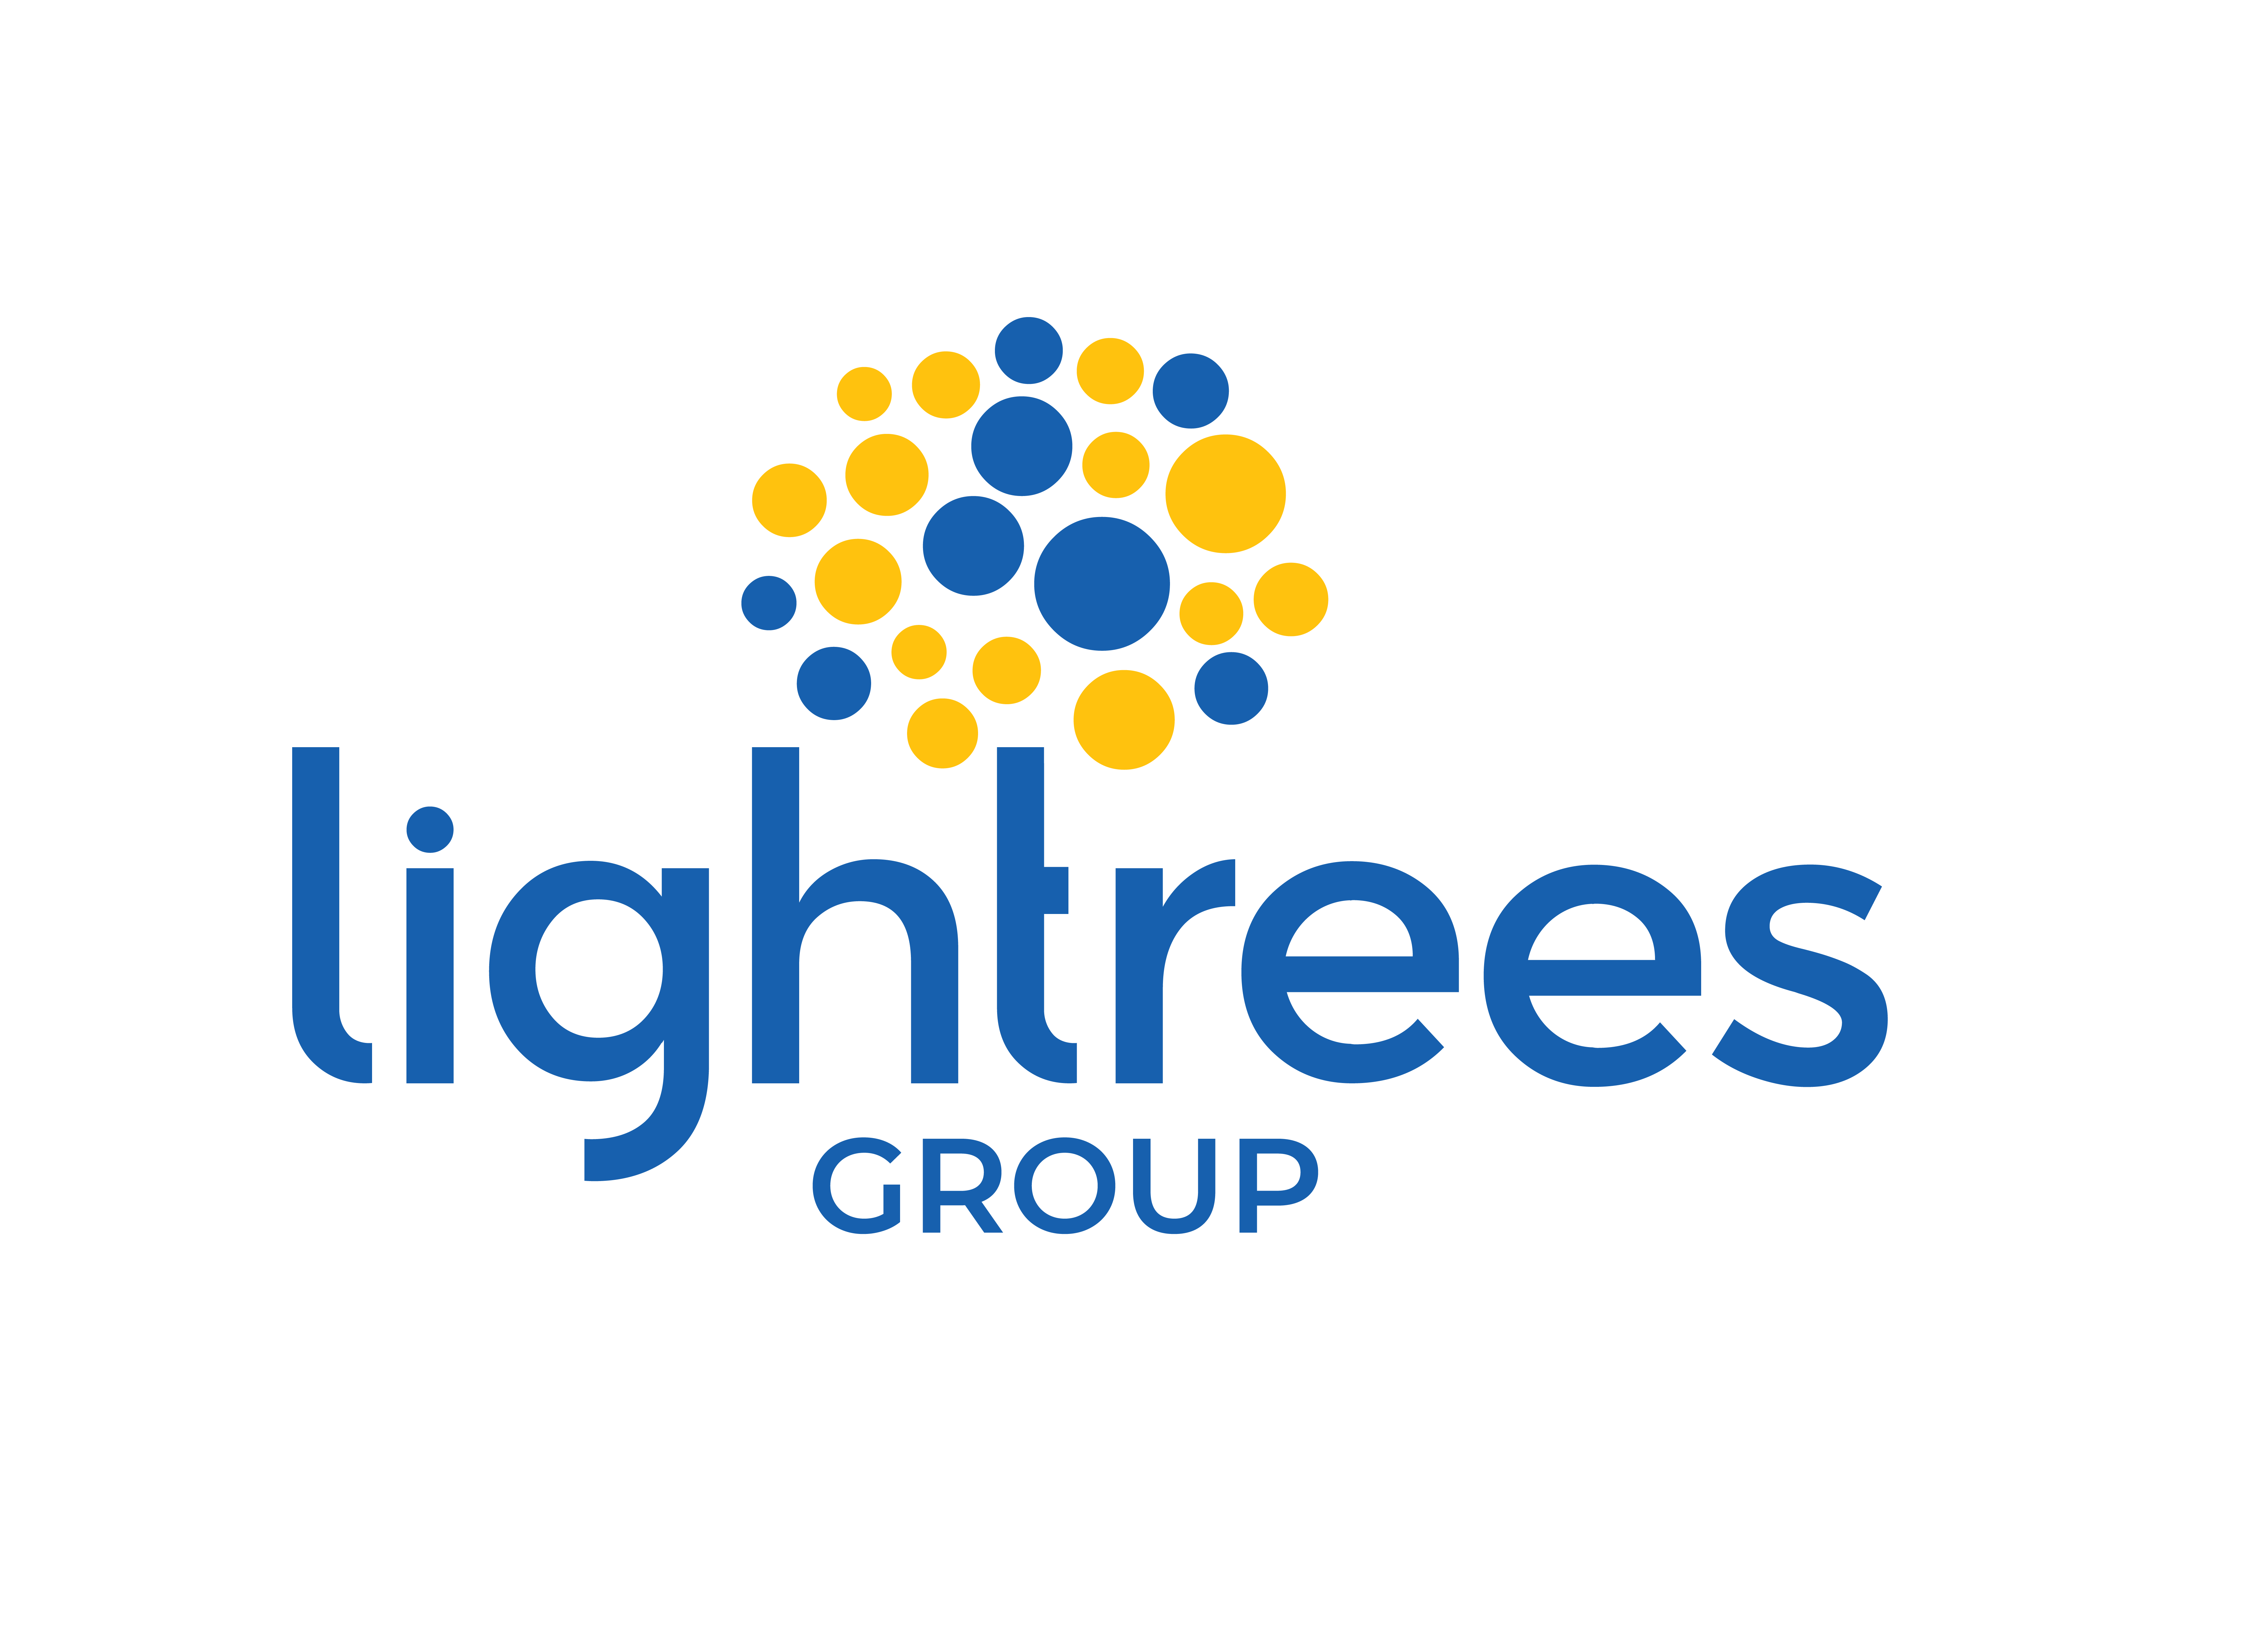 Lightrees Group